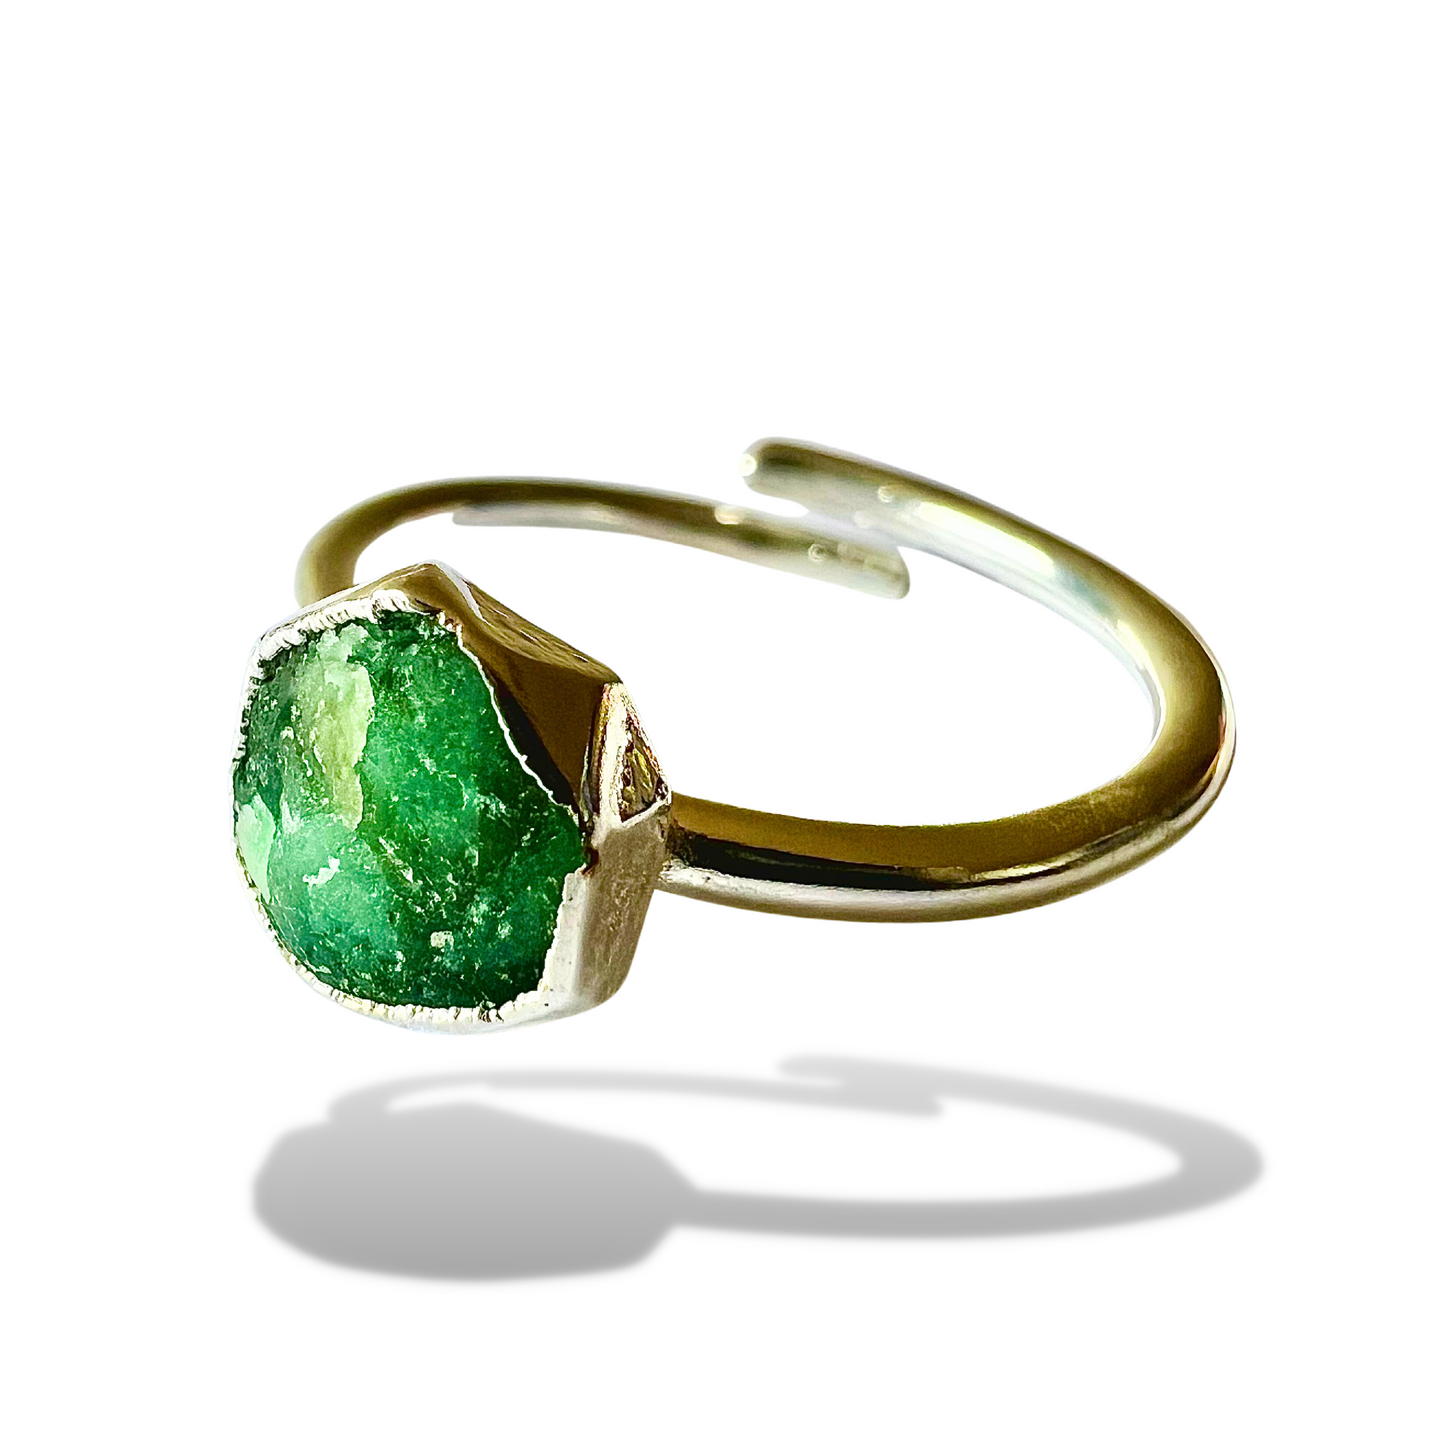 Raw Emerald Handmade Adjustable Ring in Sterling Silver